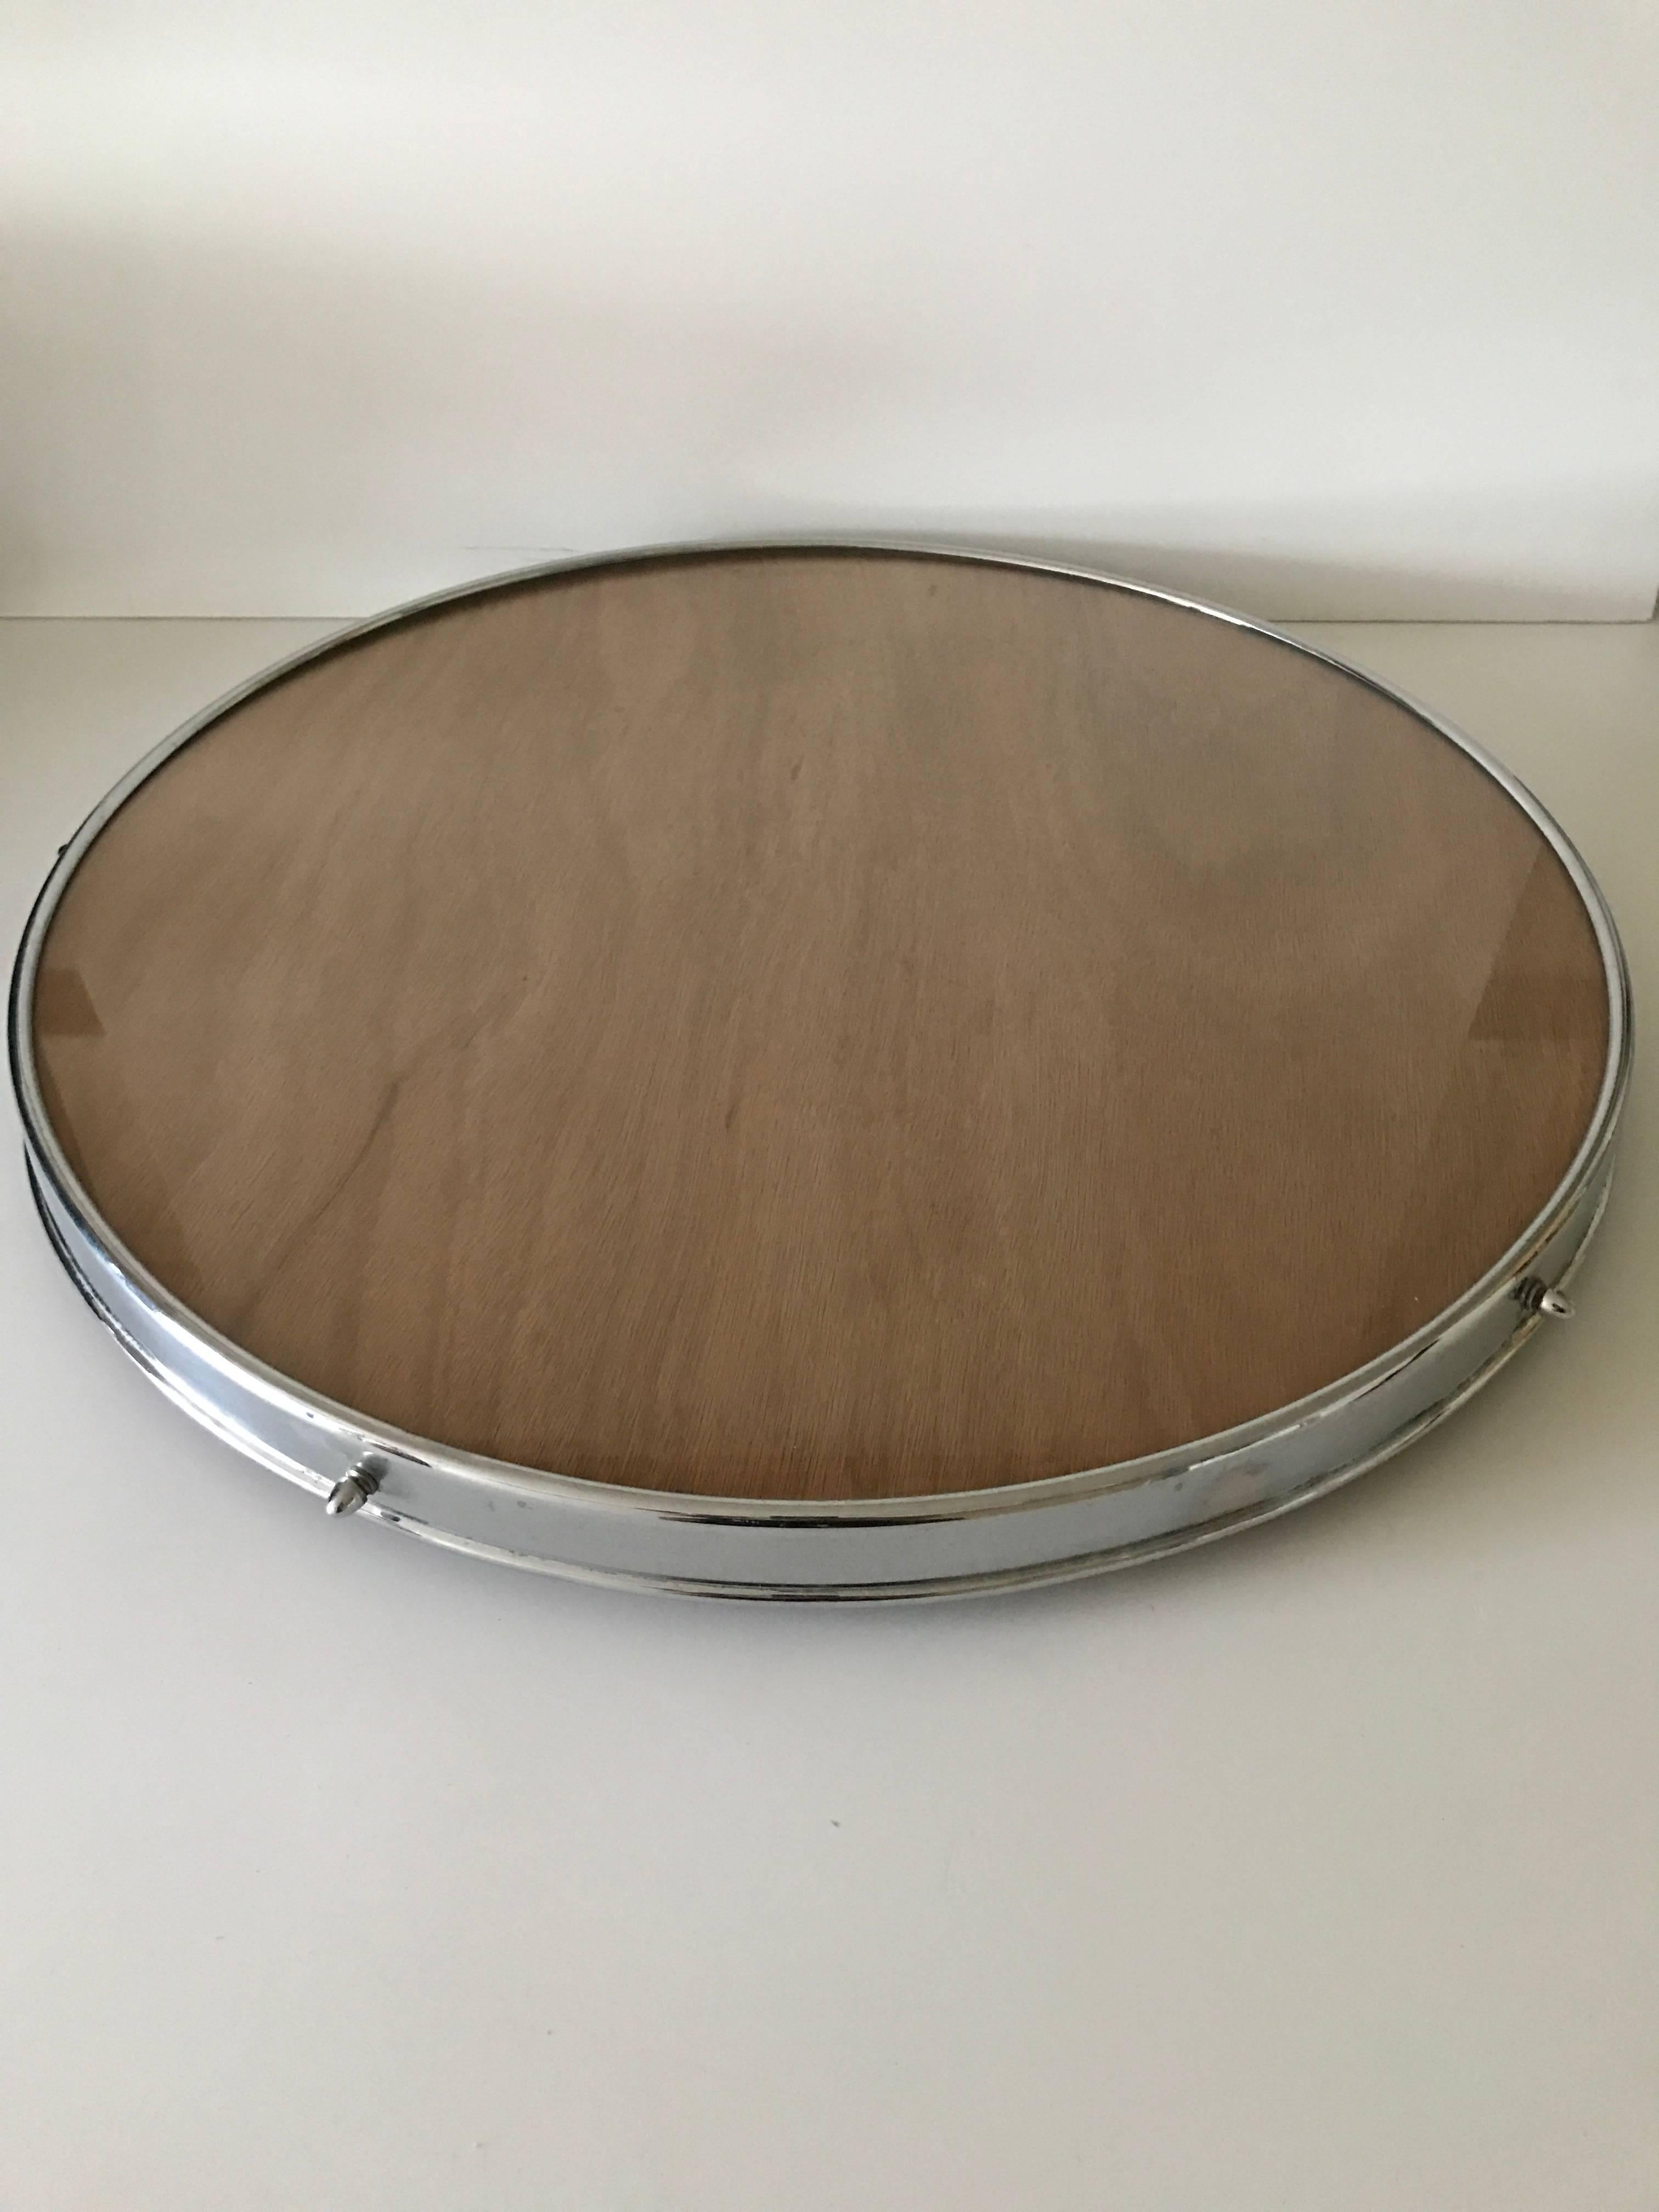 1950 large Swedish chrome glass and teak spinning serving table.
A very nice serving table to have in the centre of the table when serving many different dishes. It is most likely made in the mid-1950s. The large diameter is 62cm and the height is